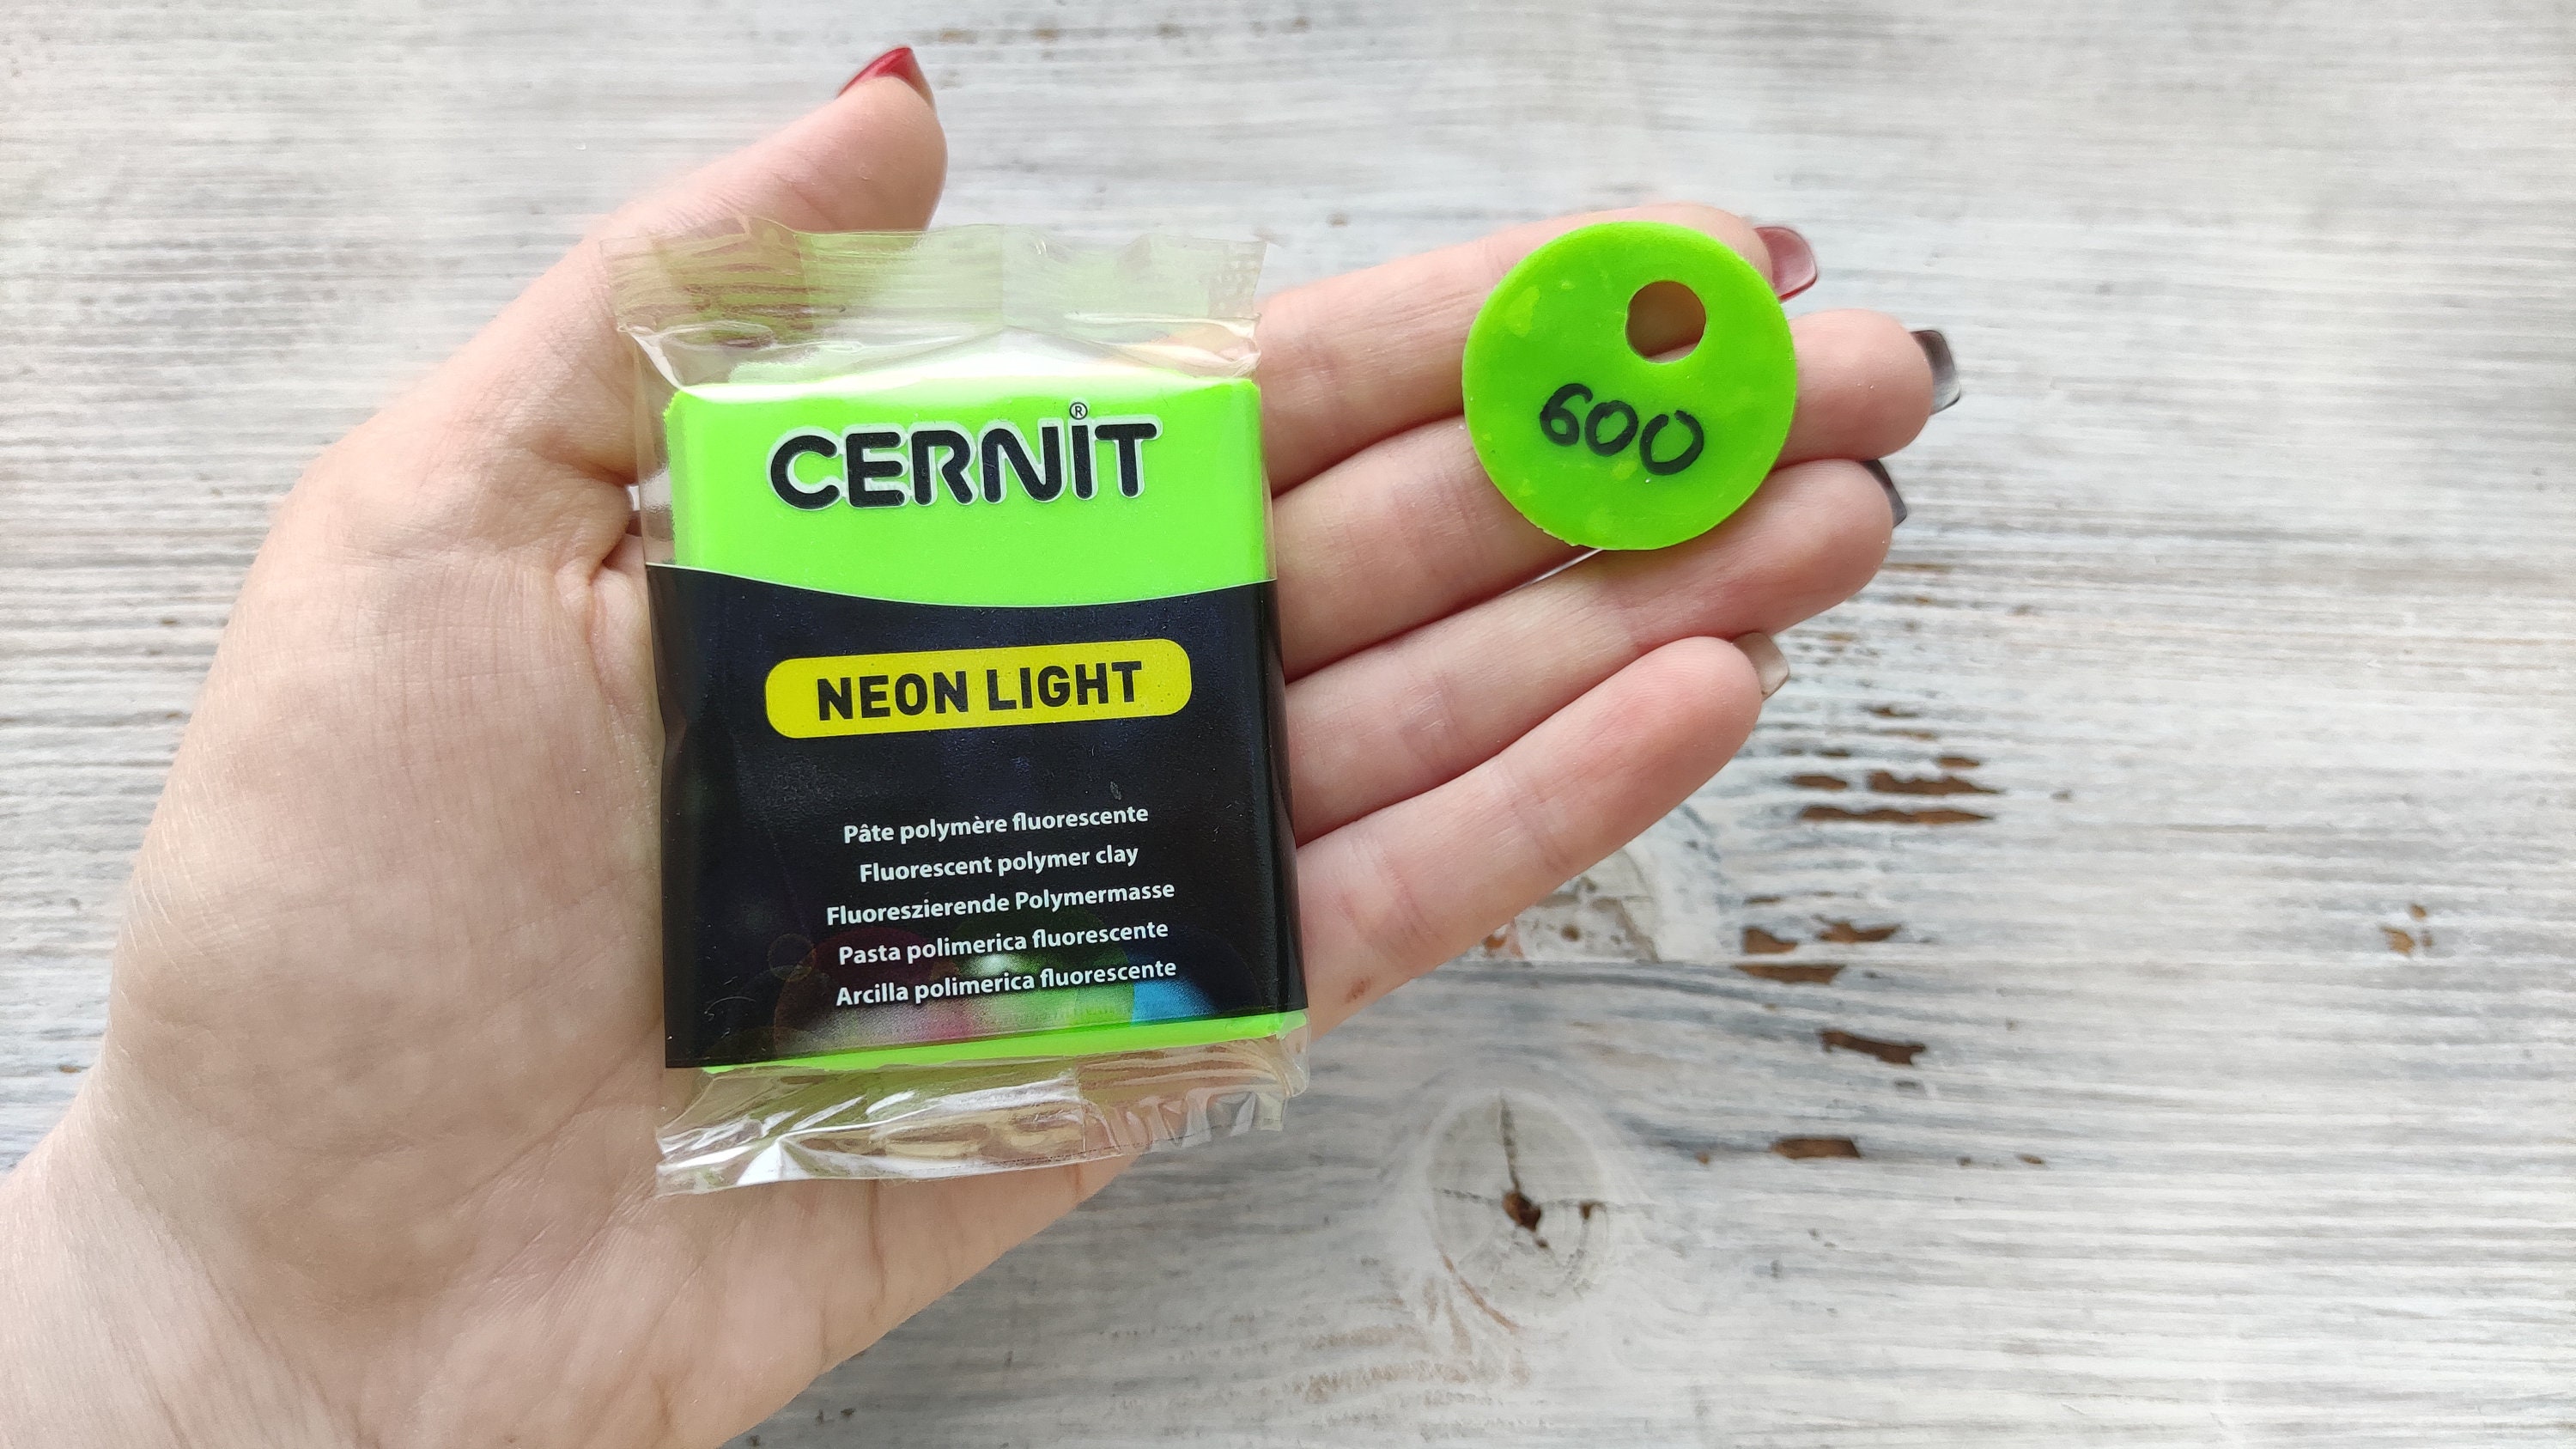 CERNIT Translucent Serie Polymer Clay, Lime Green, Nr. 605 Polymer Clay,  56g 2oz, Oven-hardening Polymer Modeling Clay 